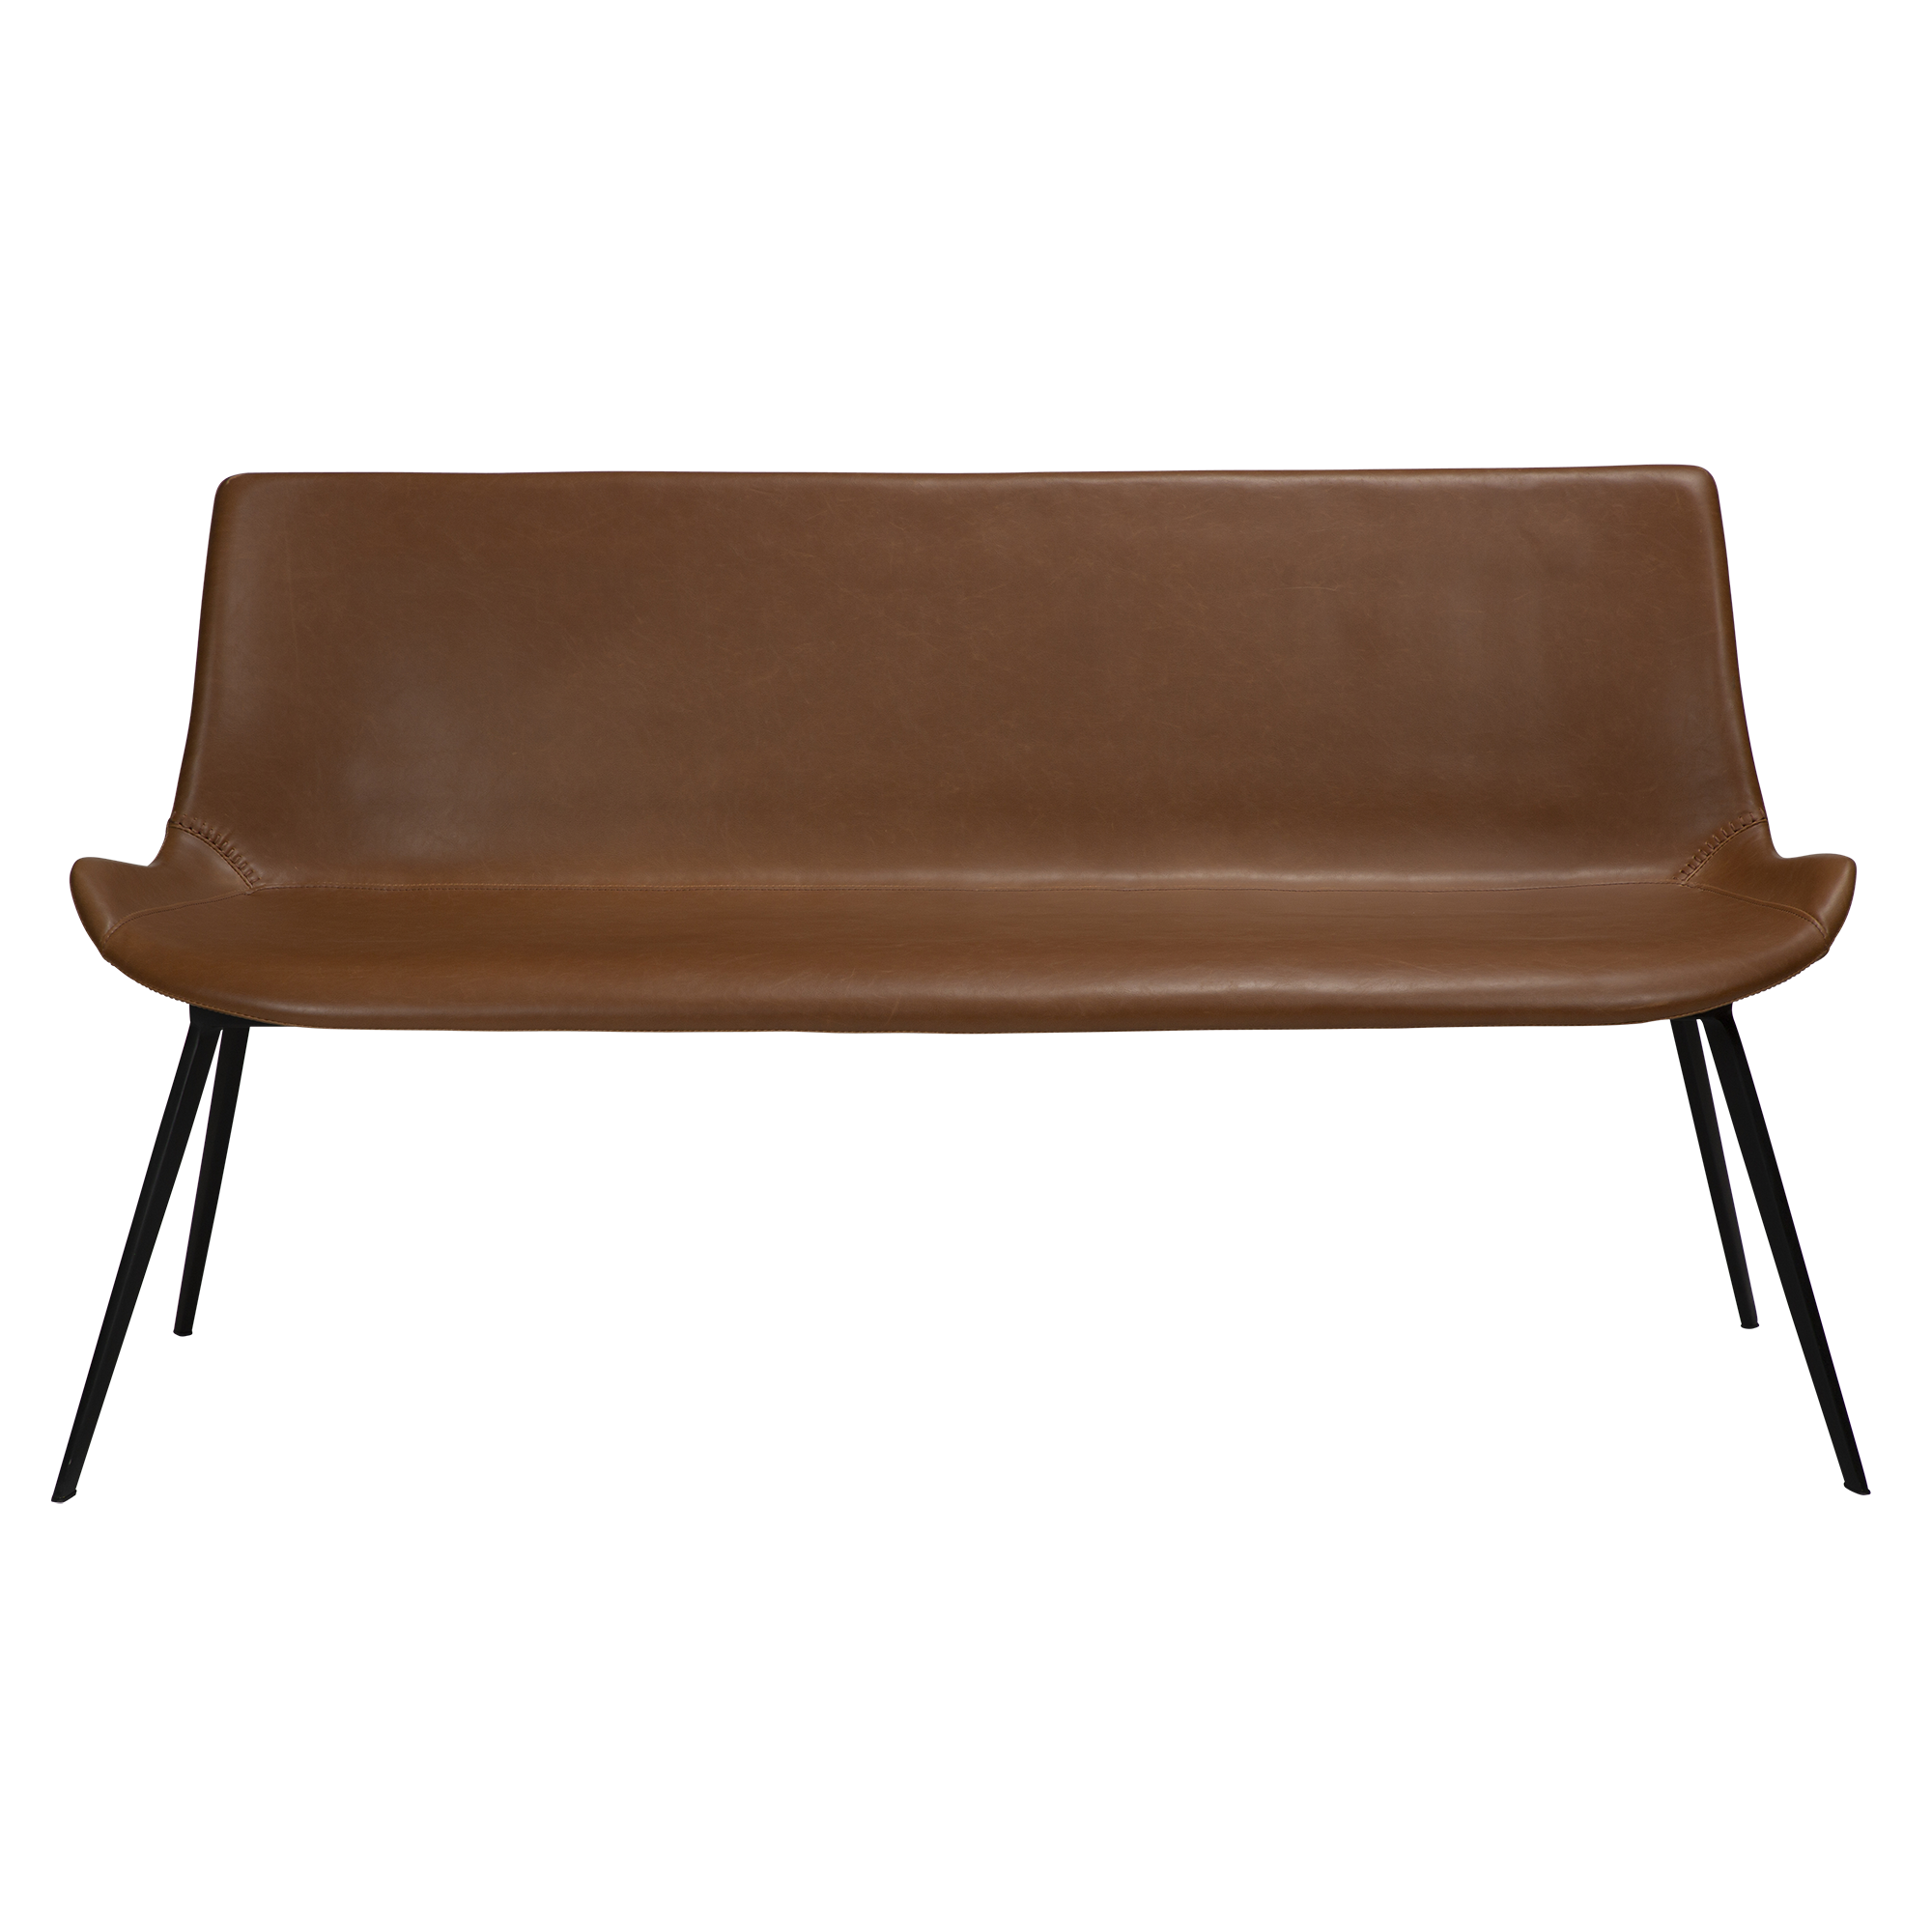 Hype Bench Vintage Light Brown Art Leather With Black Metal Legs 700690620 02 Front